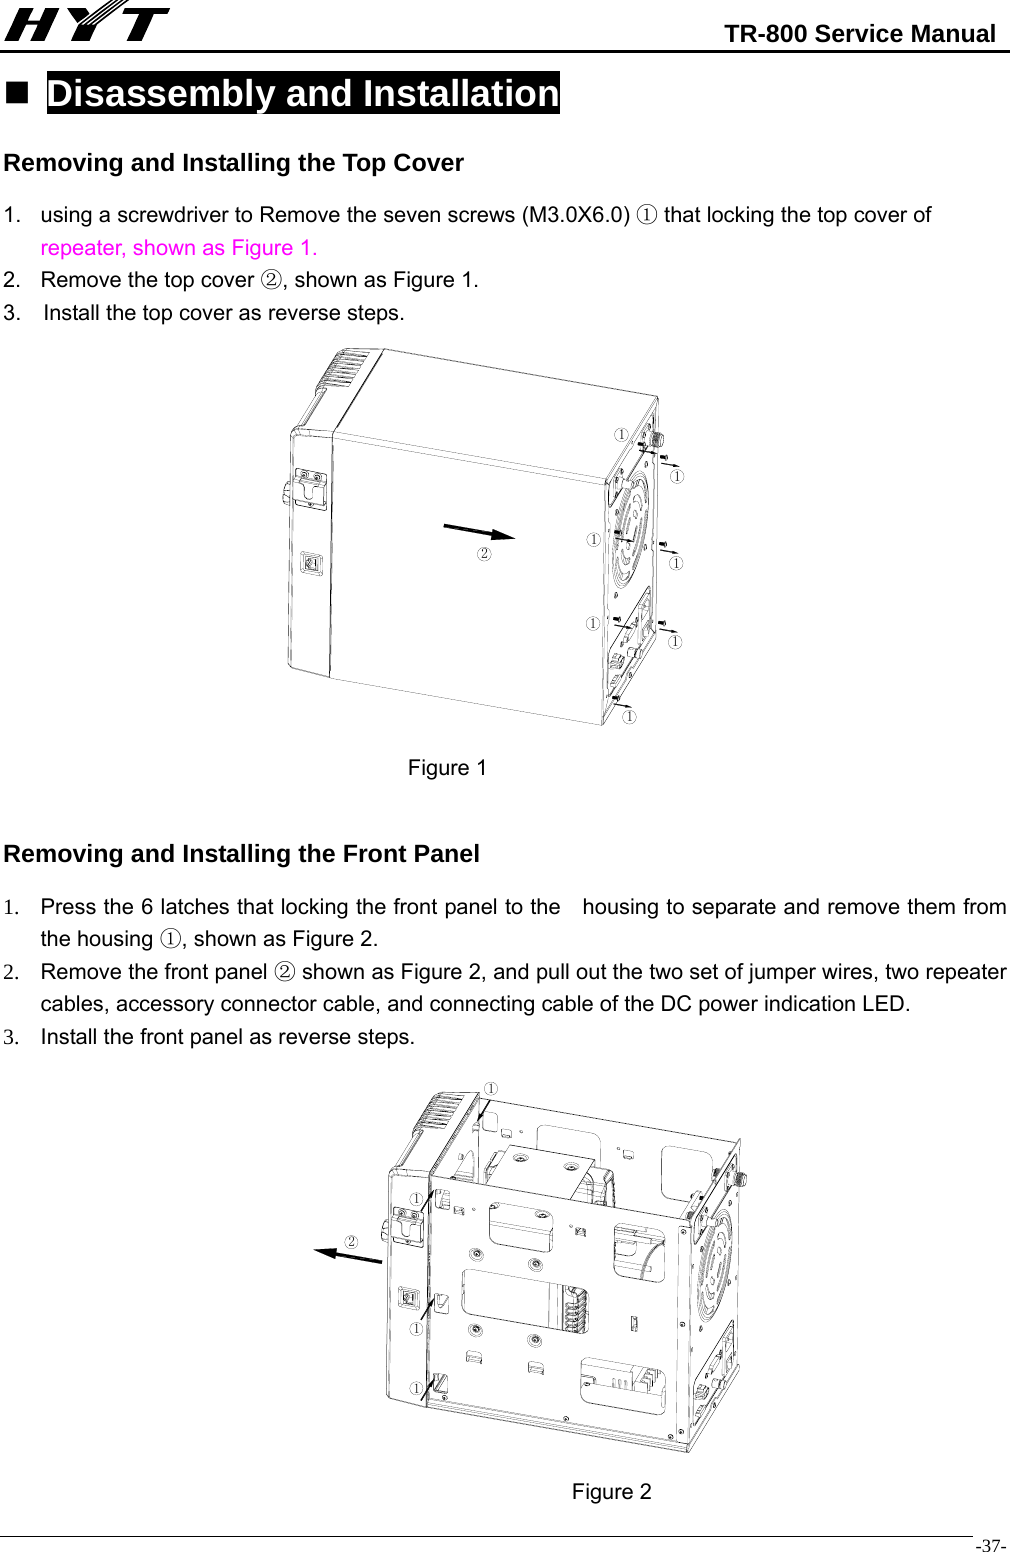                                                            TR-800 Service Manual  -37- Disassembly and Installation Removing and Installing the Top Cover 1.  using a screwdriver to Remove the seven screws (M3.0X6.0)   that locking the top cover of ①repeater, shown as Figure 1. 2.  Remove the top cover  , shown as Figure 1.② 3.    Install the top cover as reverse steps.                                                   Figure 1  Removing and Installing the Front Panel 1.  Press the 6 latches that locking the front panel to the    housing to separate and remove them from the housing  , s①hown as Figure 2. 2.  Remove the front panel   shown as Figure 2, and pull out the two ②set of jumper wires, two repeater cables, accessory connector cable, and connecting cable of the DC power indication LED. 3.  Install the front panel as reverse steps.                Figure 2 2111111121111